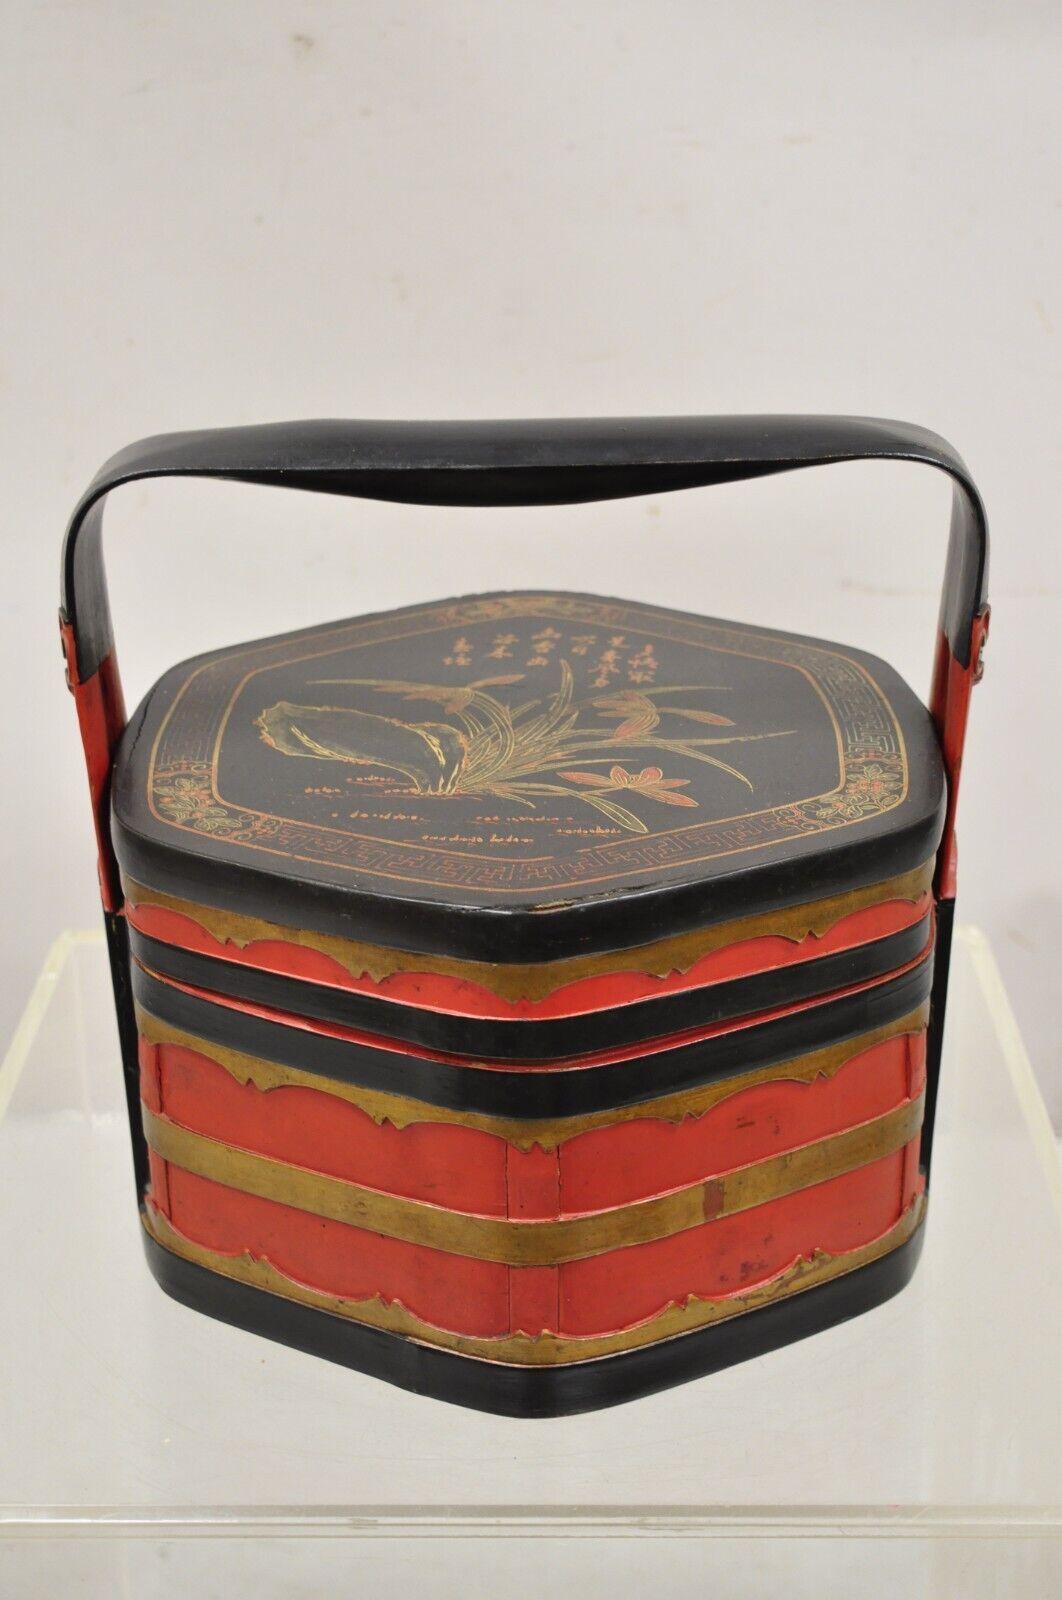 Vintage Chinese Black and Red Lacquer Floral Painted Lidded Wooden Basket Box. Circa Early to Mid 20th Century. Measurements: 11